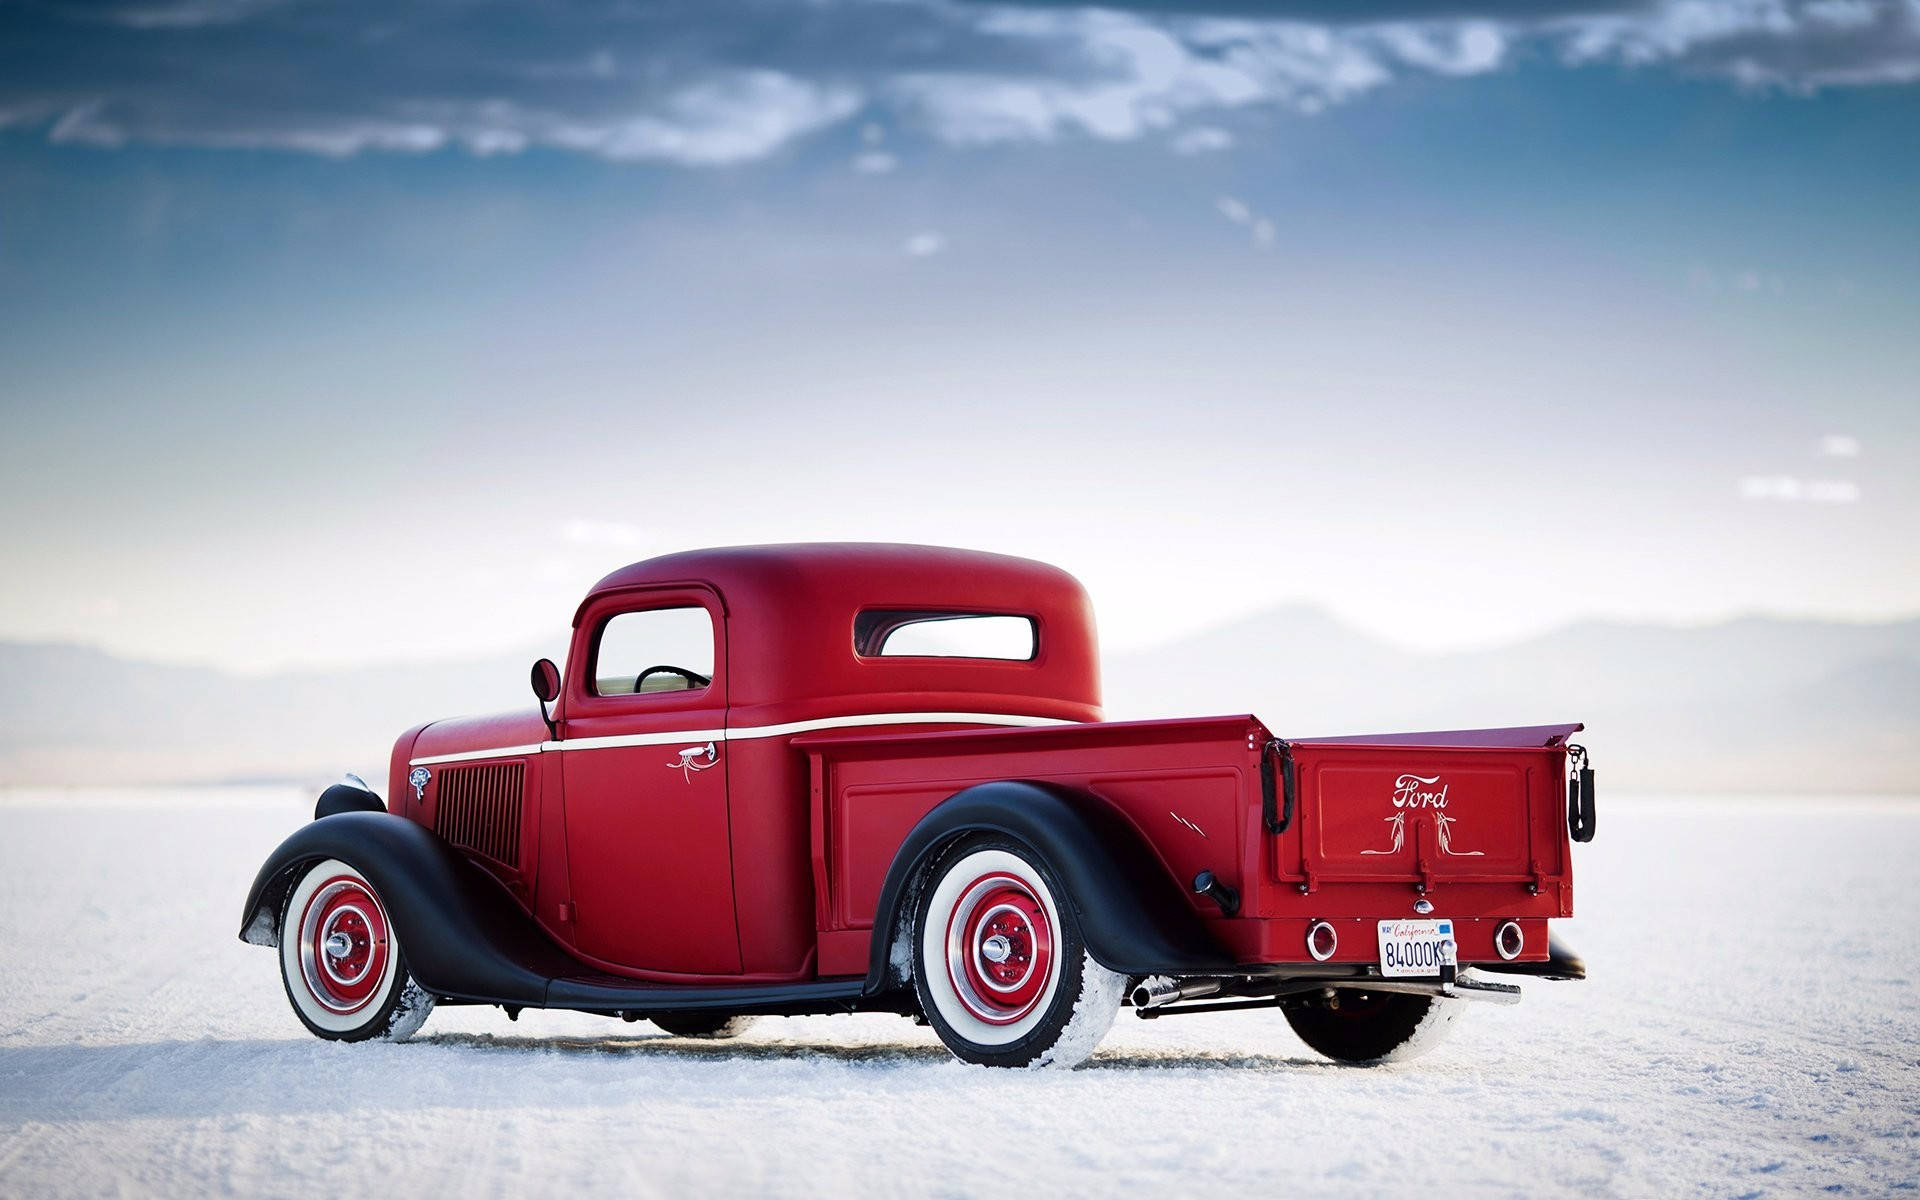 Free Old Ford Truck Wallpaper Downloads, [100+] Old Ford Truck Wallpapers  for FREE 